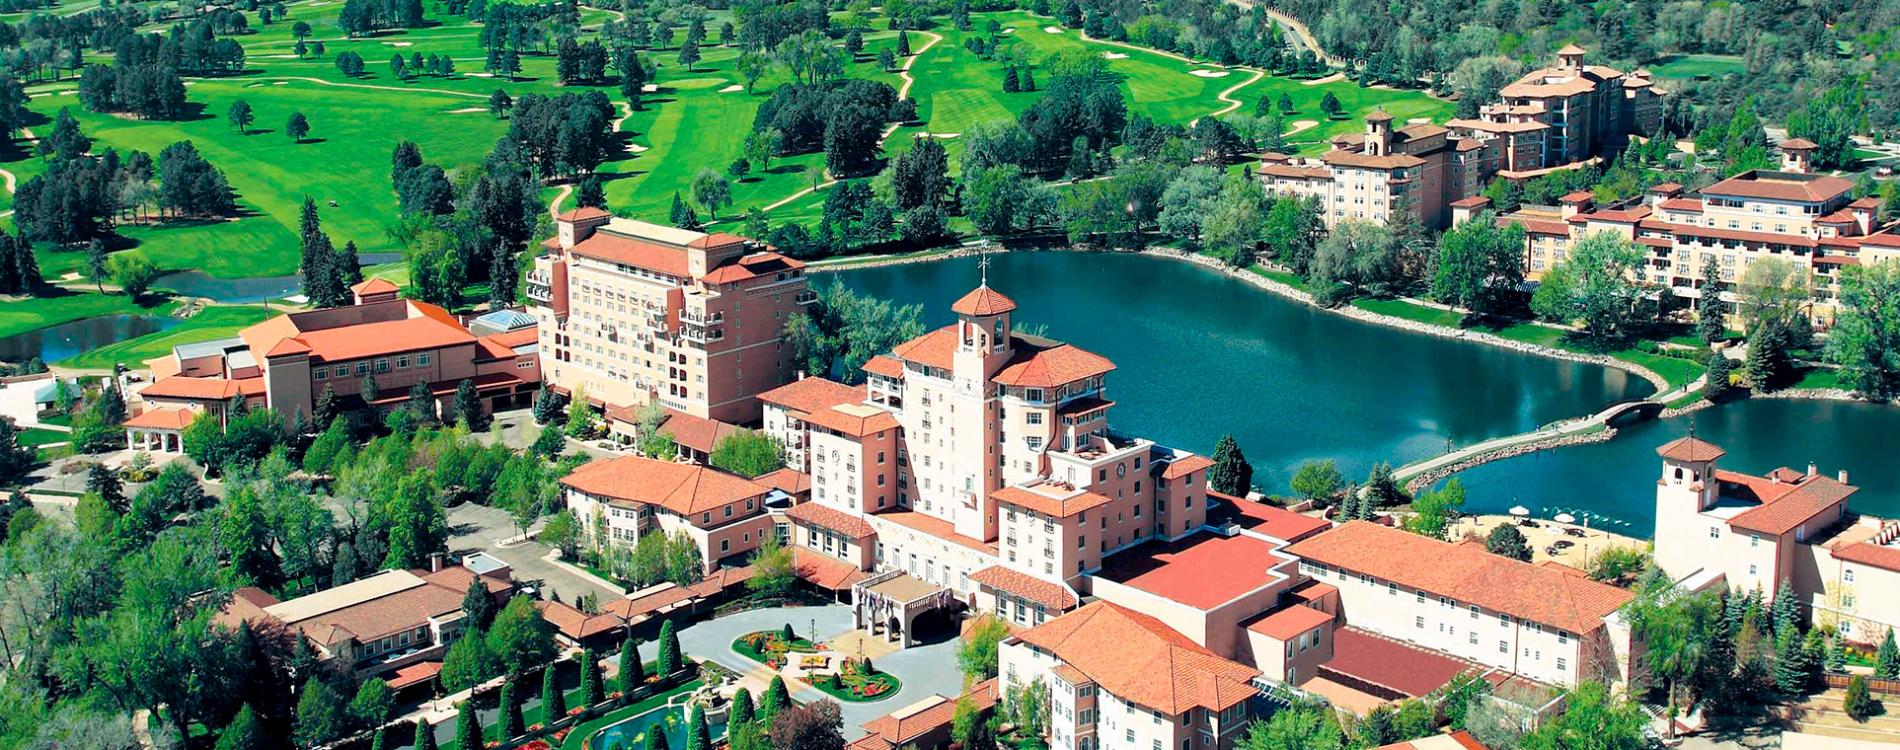 Five-Star Family Fun At The Broadmoor ⋆ Every Avenue Travel